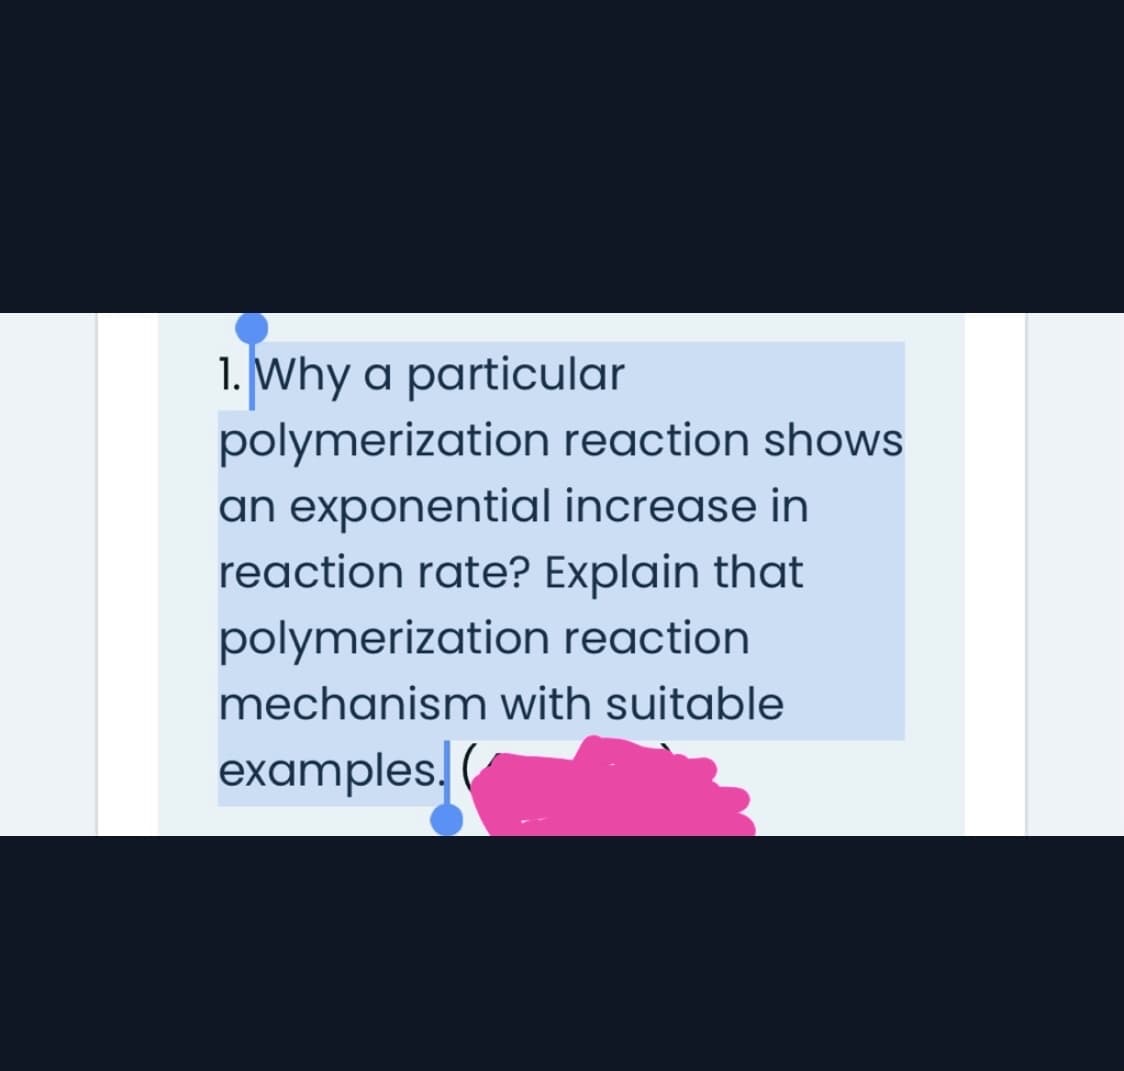 1. Why a particular
polymerization reaction shows
an exponential increase in
reaction rate? Explain that
polymerization reaction
mechanism with suitable
examples.
